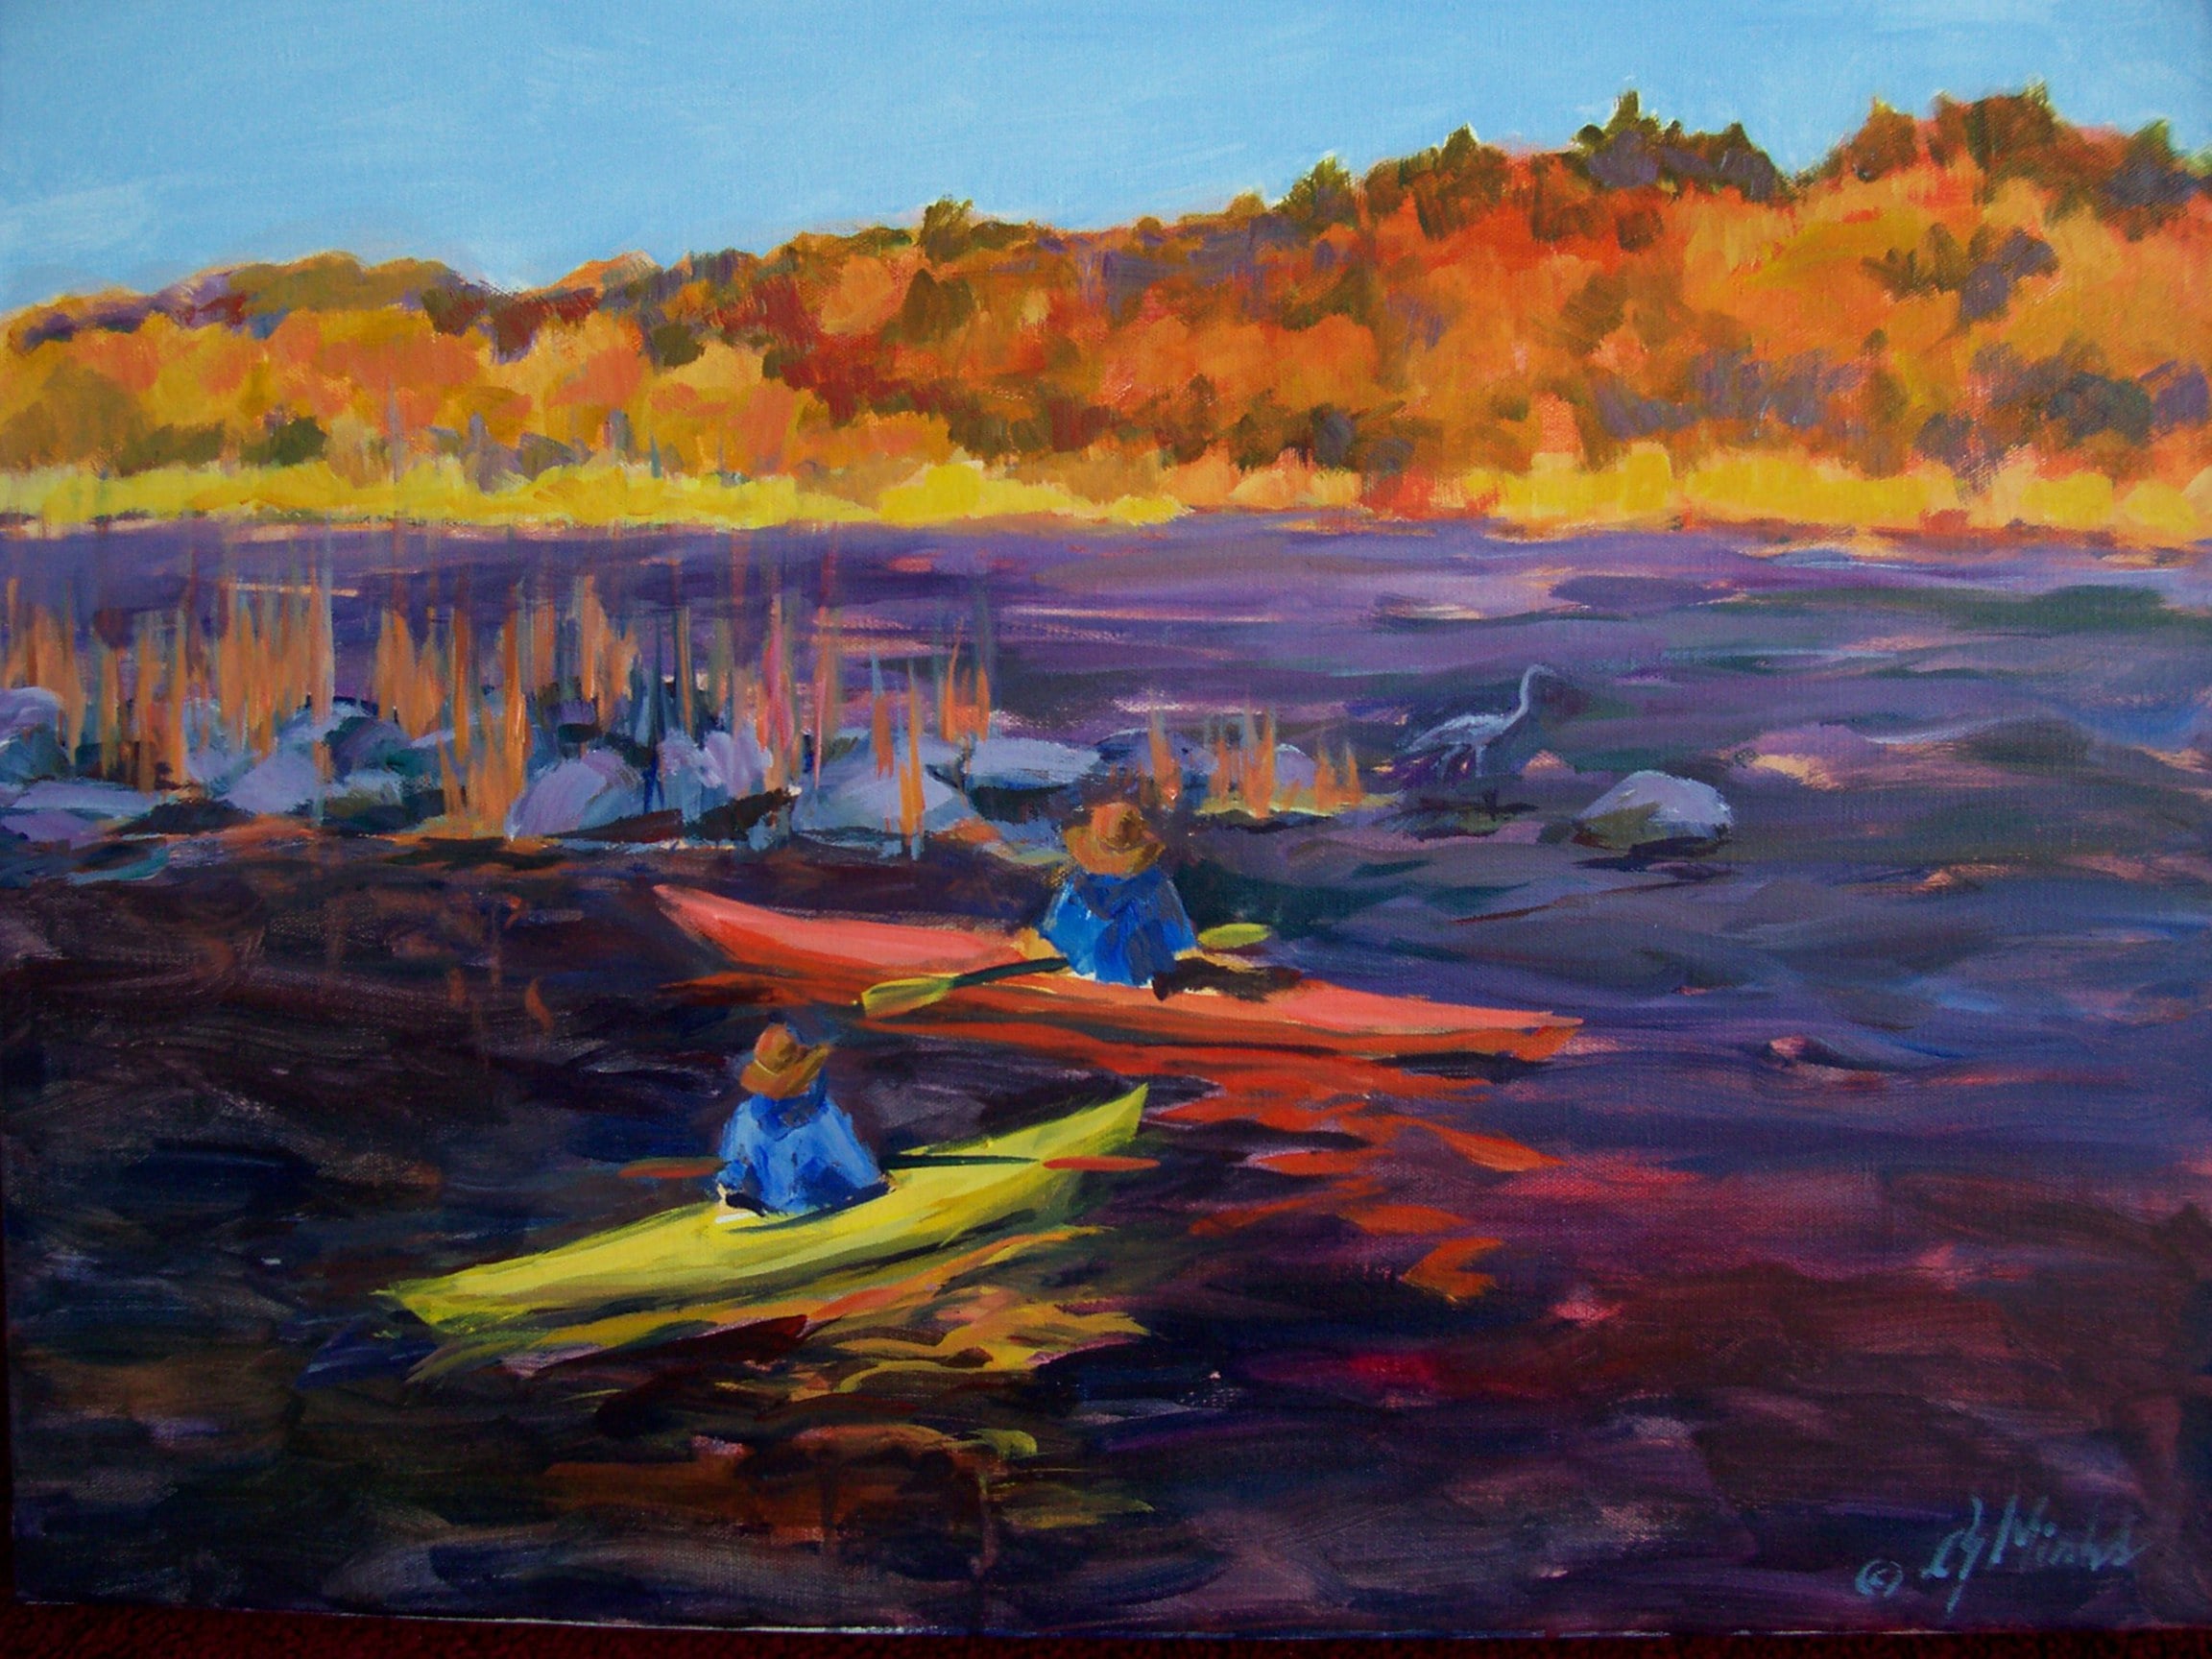 A painting of two people kayaking in the autumn